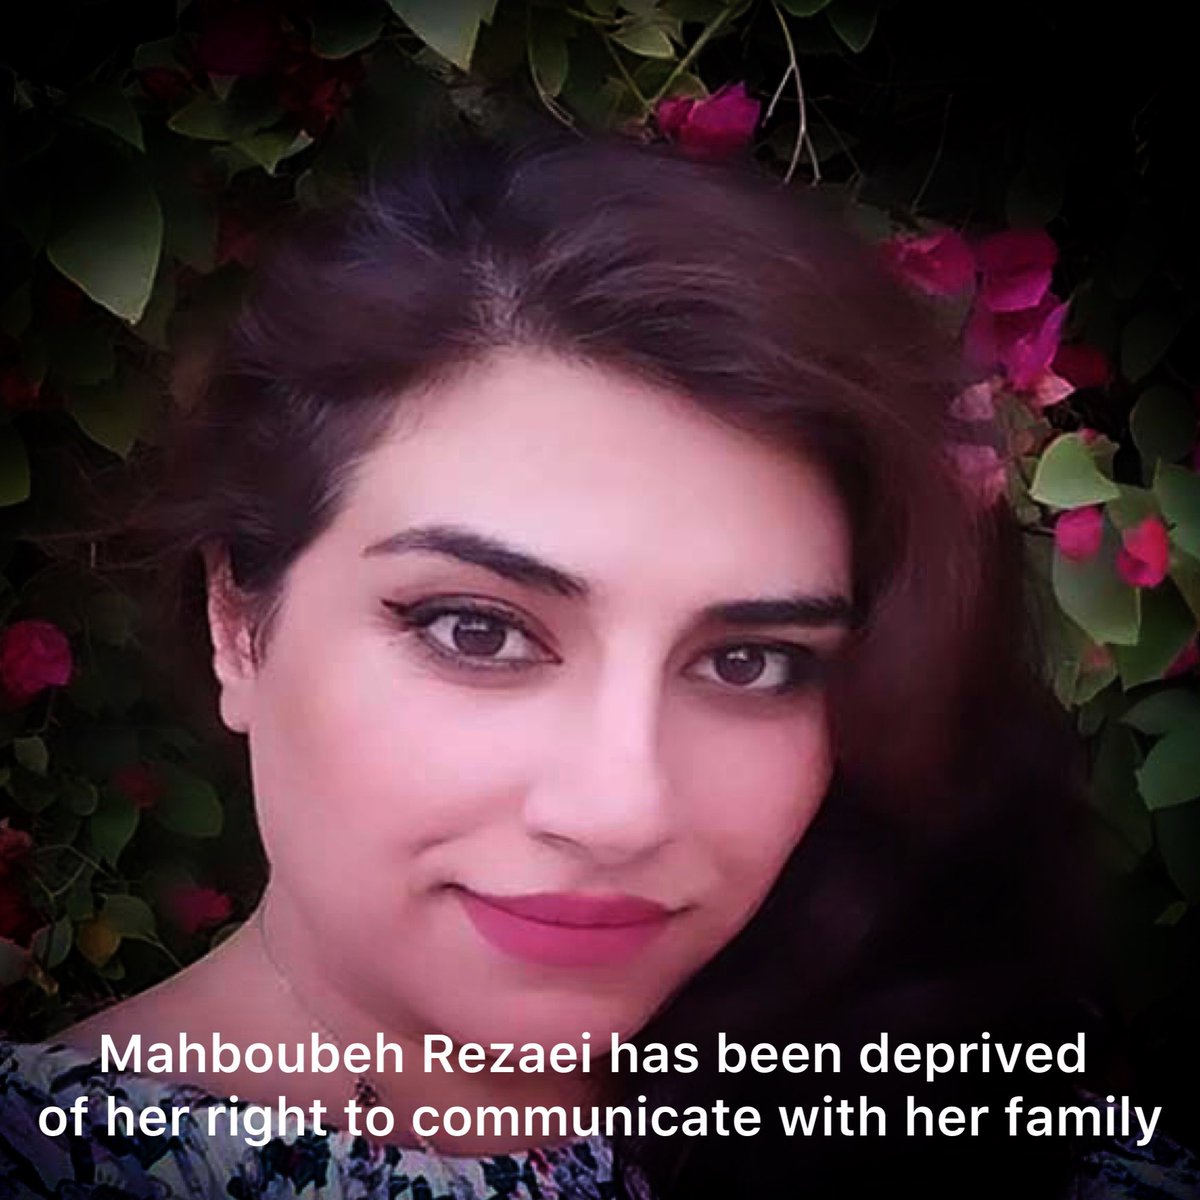 #MahboubehRezaei, a young political prisoner advocating for the monarchy, has been deprived of her right to communicate with her family and loved ones. Incarcerated in Tehran’s Evin Prison, she has received a 26-year sentence for her support of the royalist cause.